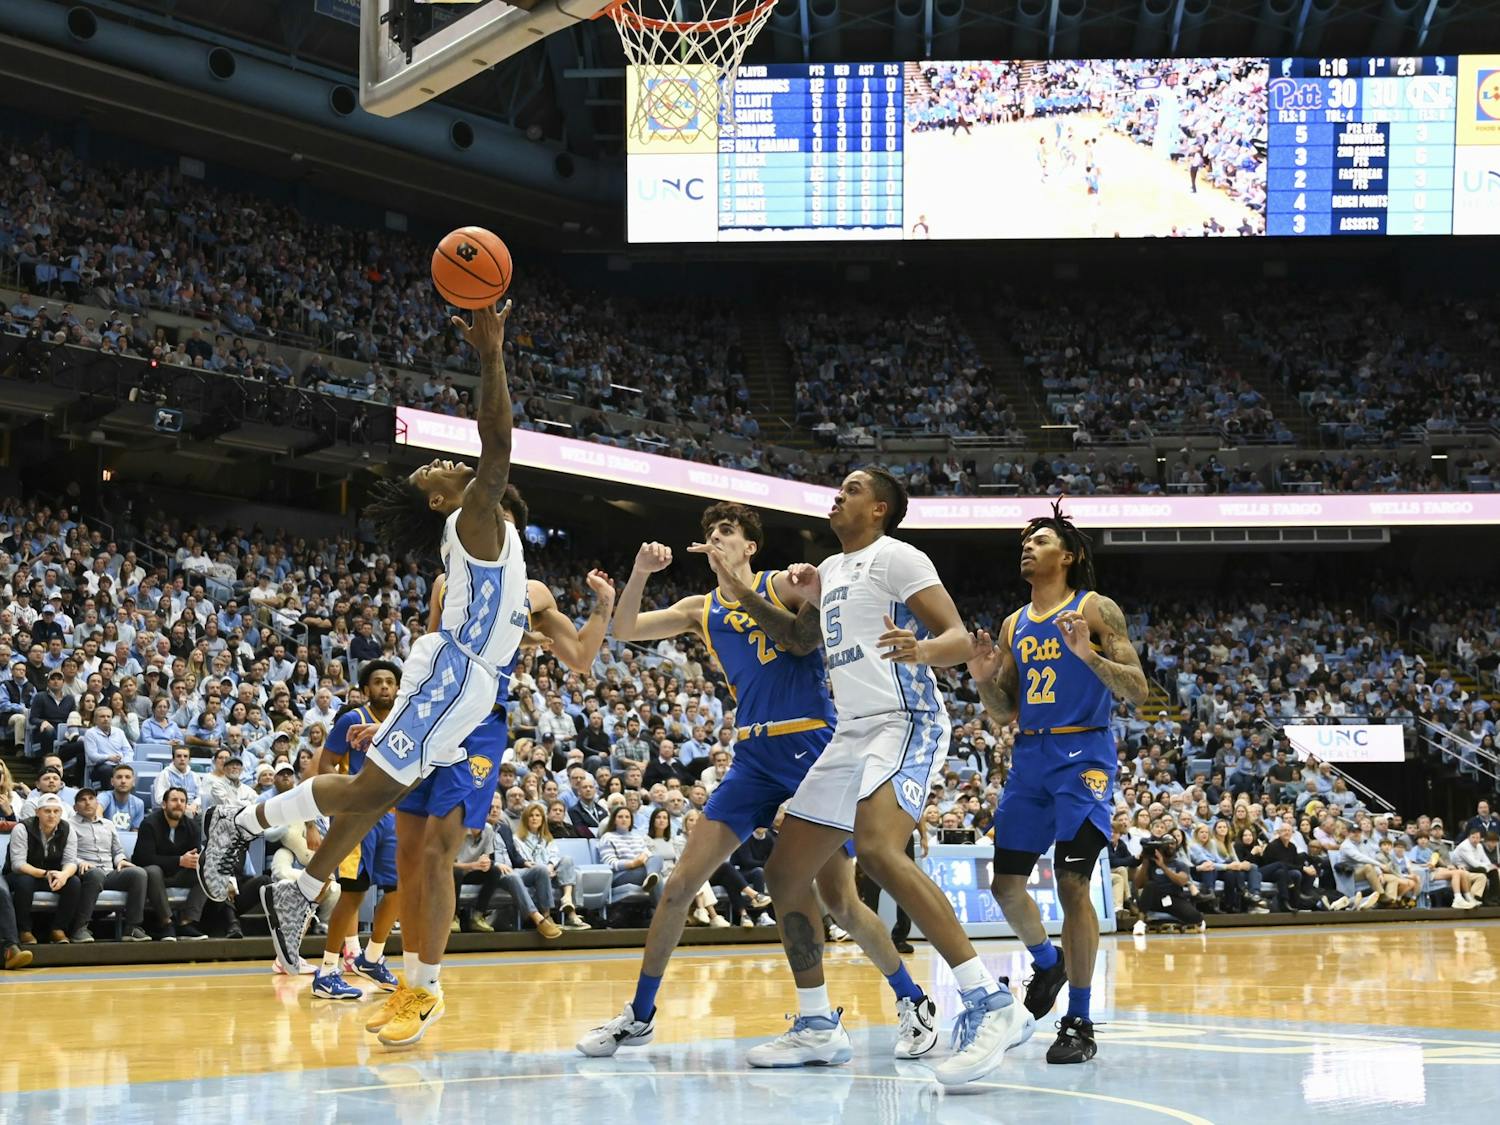 UNC junior guard Caleb Love (2) takes a shot during the men's basketball game against Pitt in the Dean Smith Center on Wednesday, Feb. 1, 2023. UNC lost 64-63.